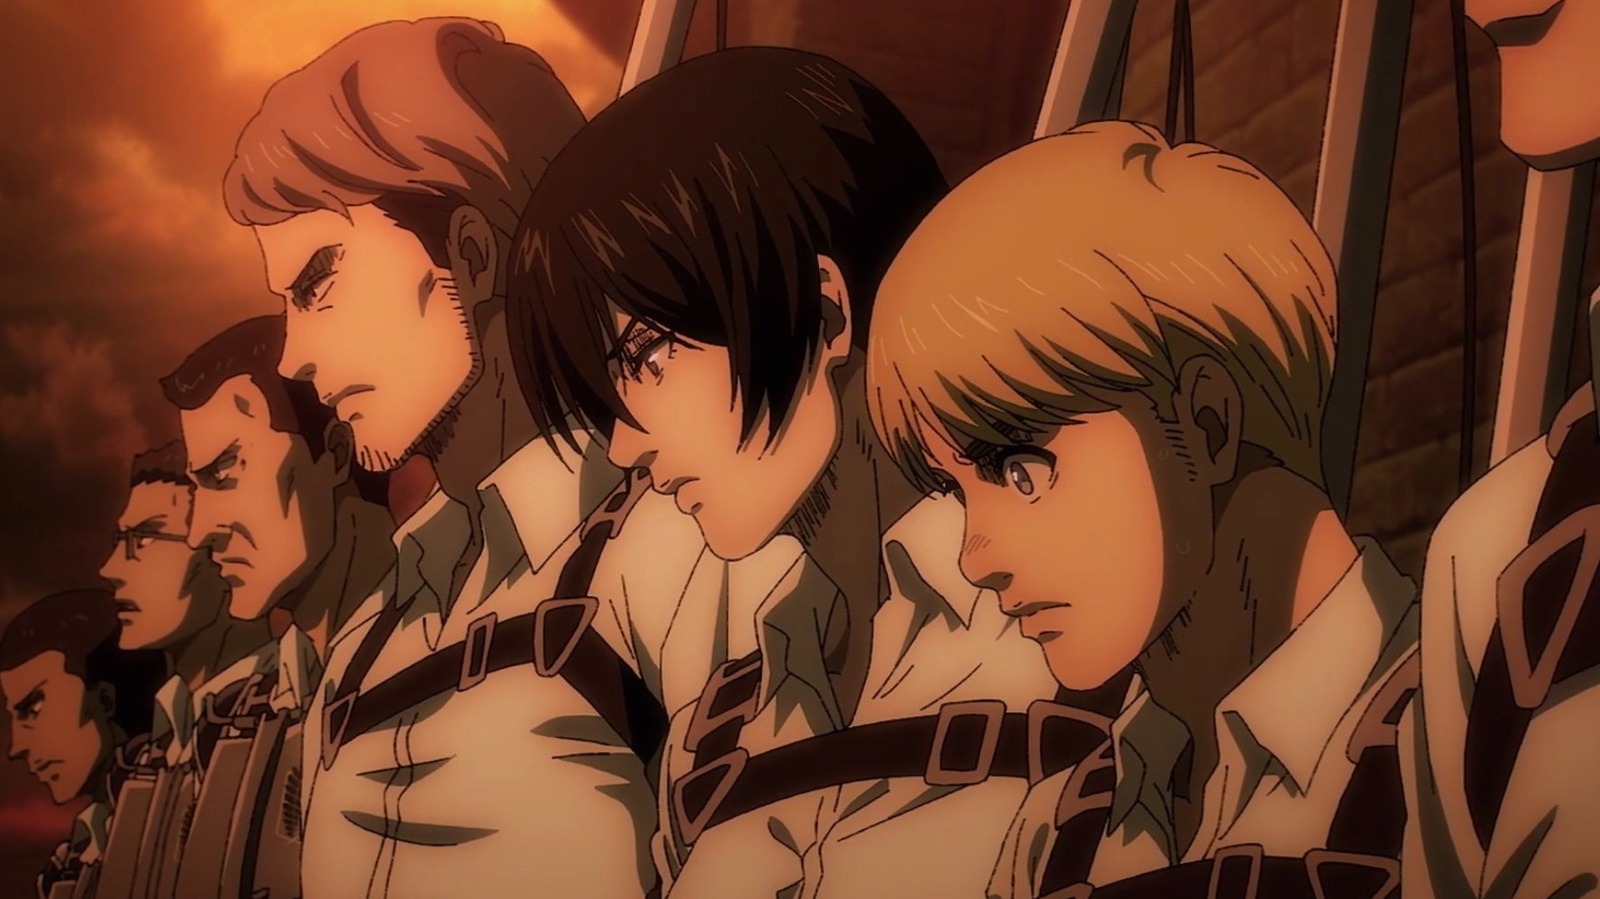 Attack on Titan recap: Everything that happened in the anime so